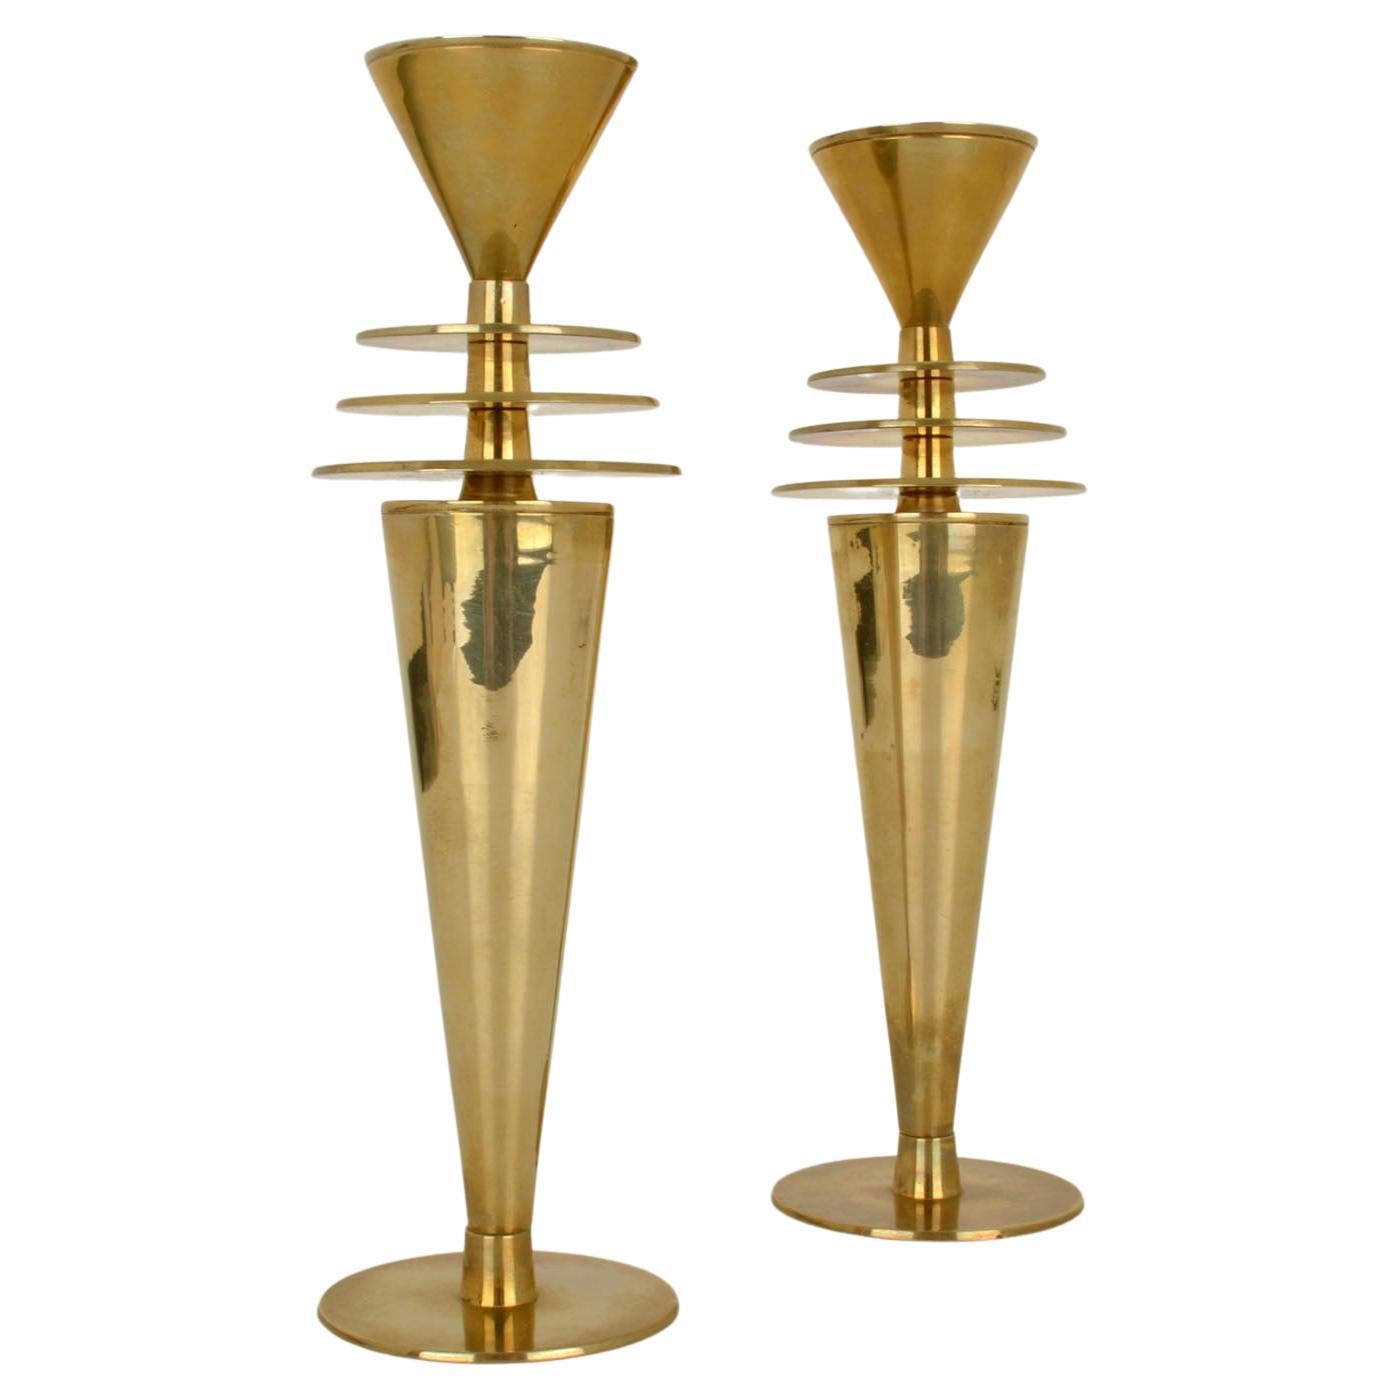 Pair of Post Modern brass candle sticks inspired by Art Deco style and Modernism. They are beautiful example of engineering.
Suitable for regular candles.